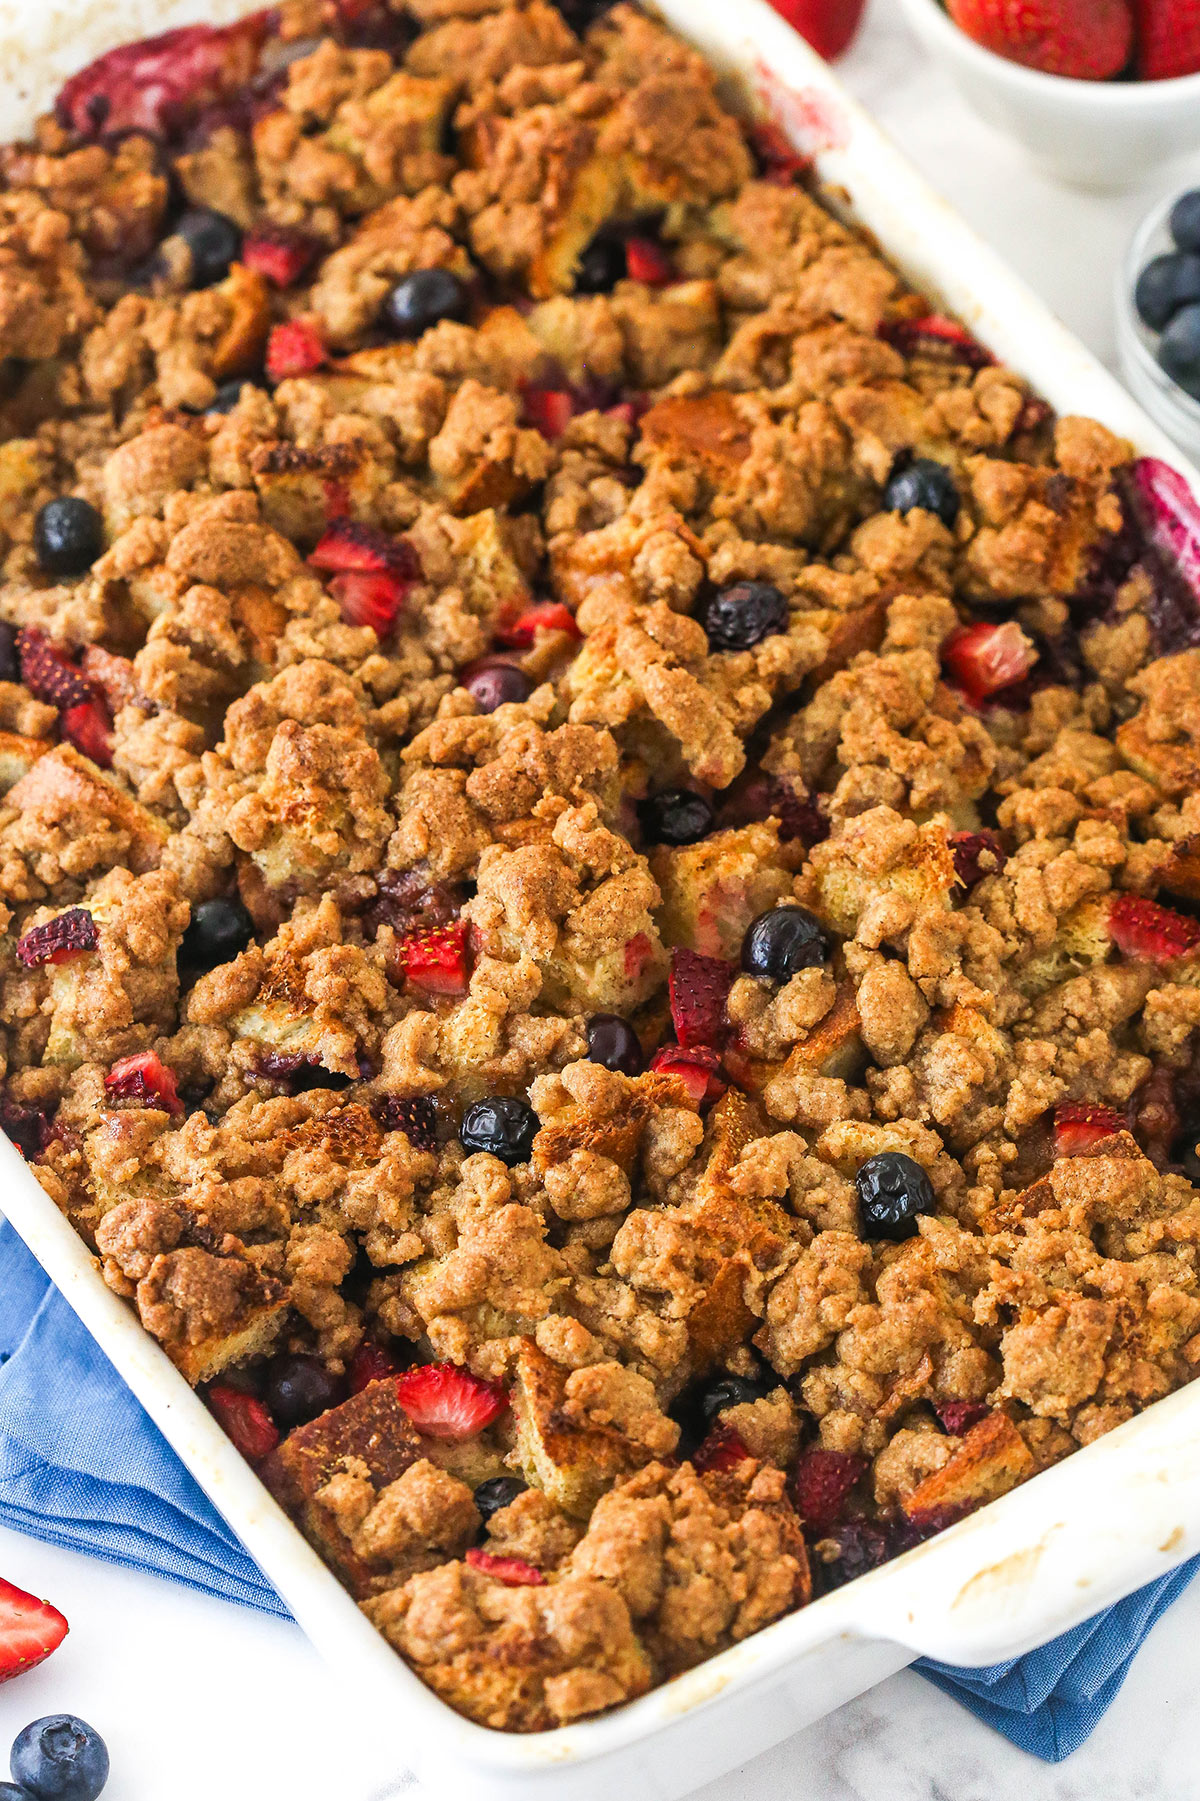 Overhead image of berry French toast casserole in a baking dish.